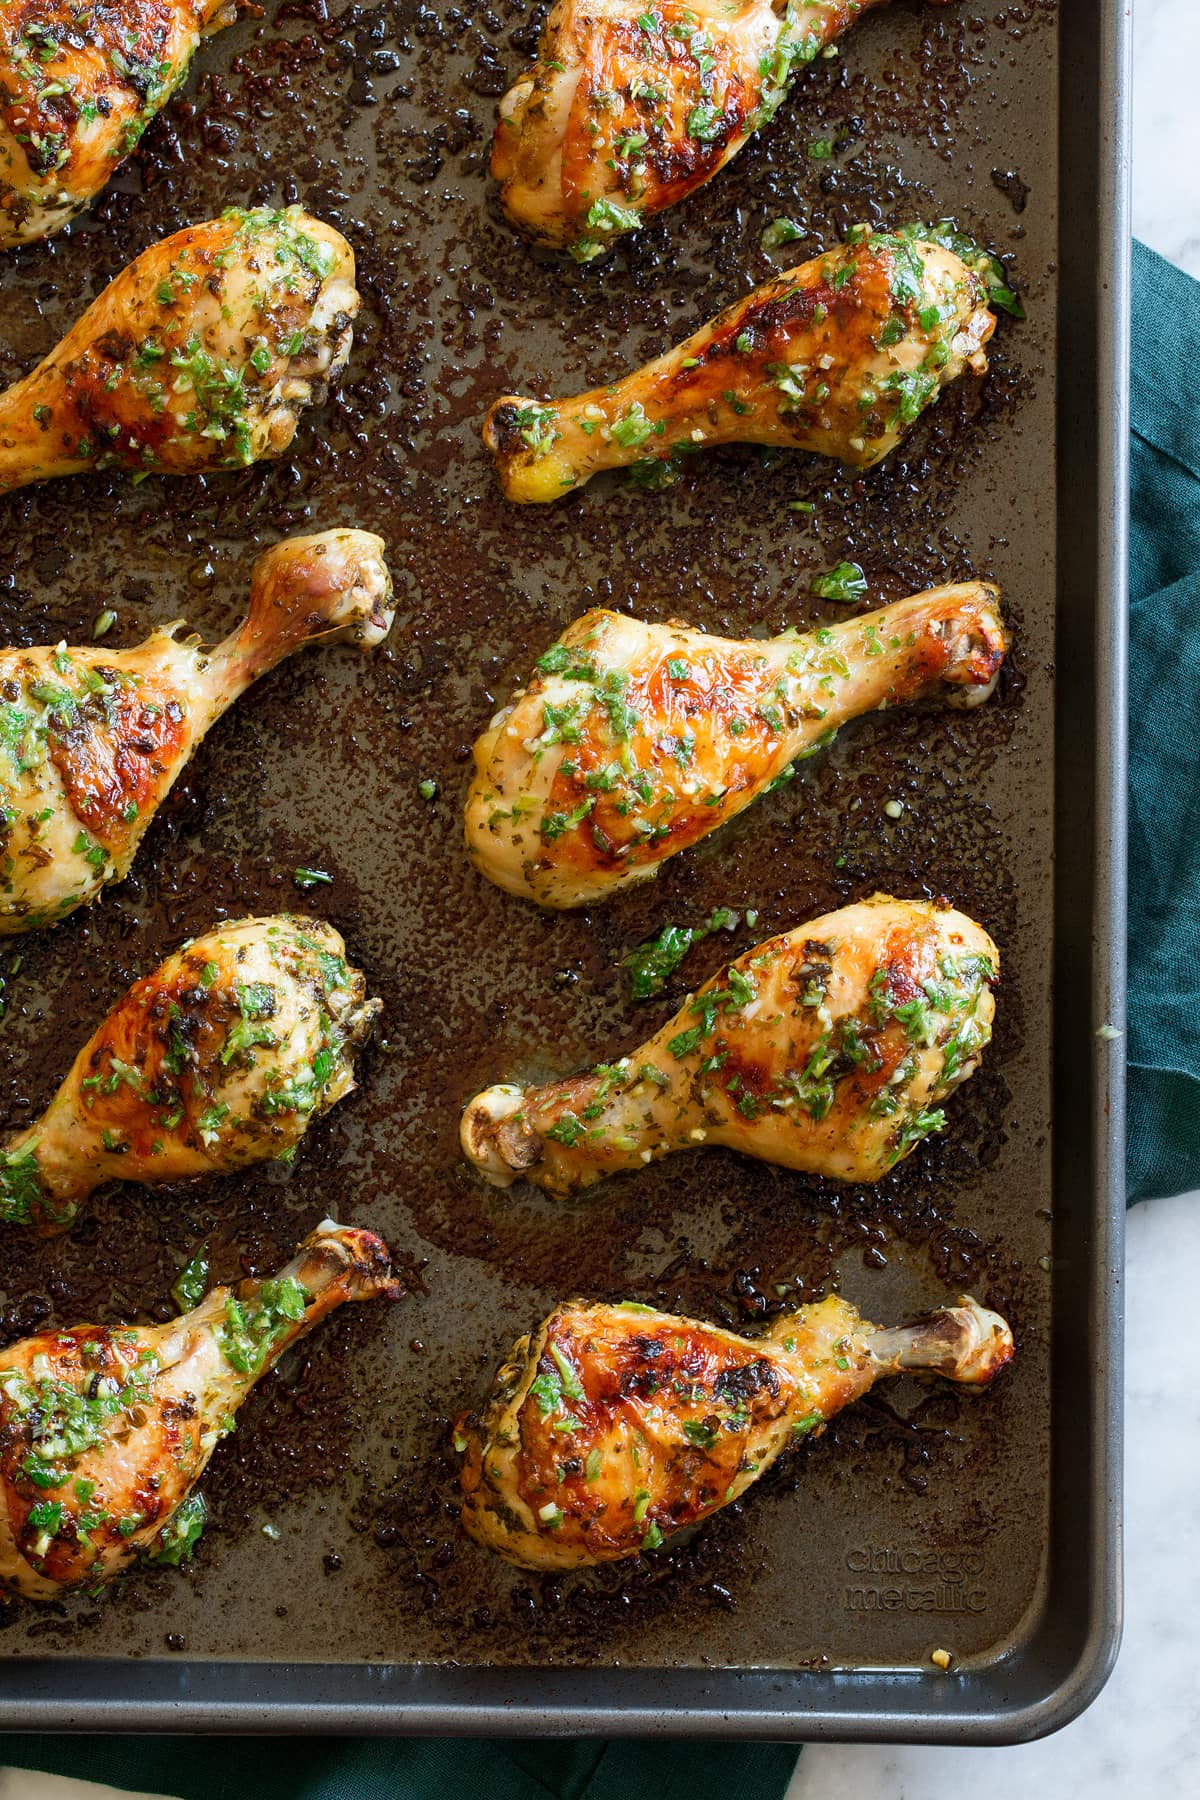 Chicken legs shown on baking sheet covered with chimichurri style sauce.